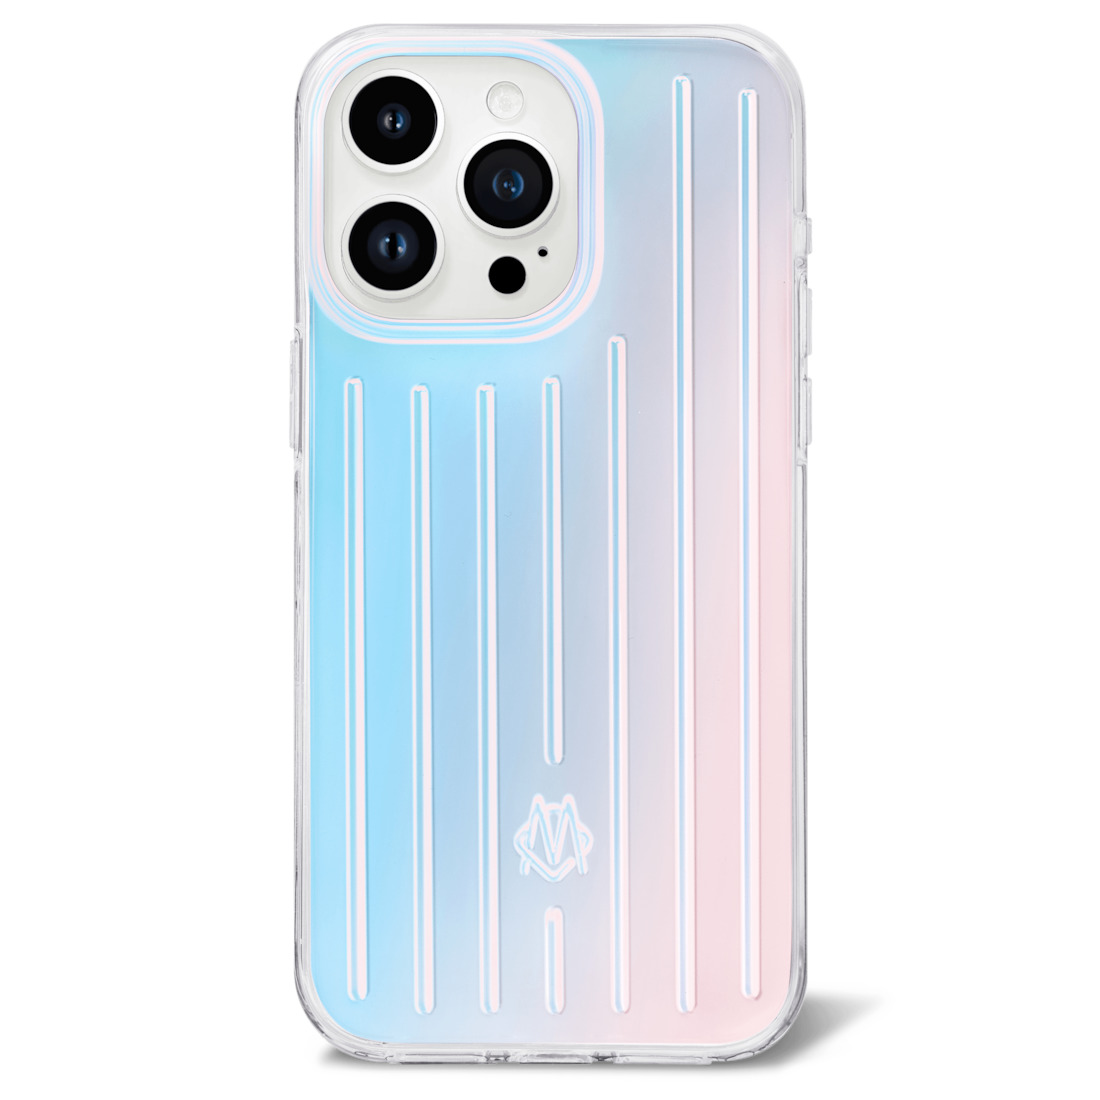 RIMOWA Tech Accessories - Polycarbonate Iridescent Case for iPhone 